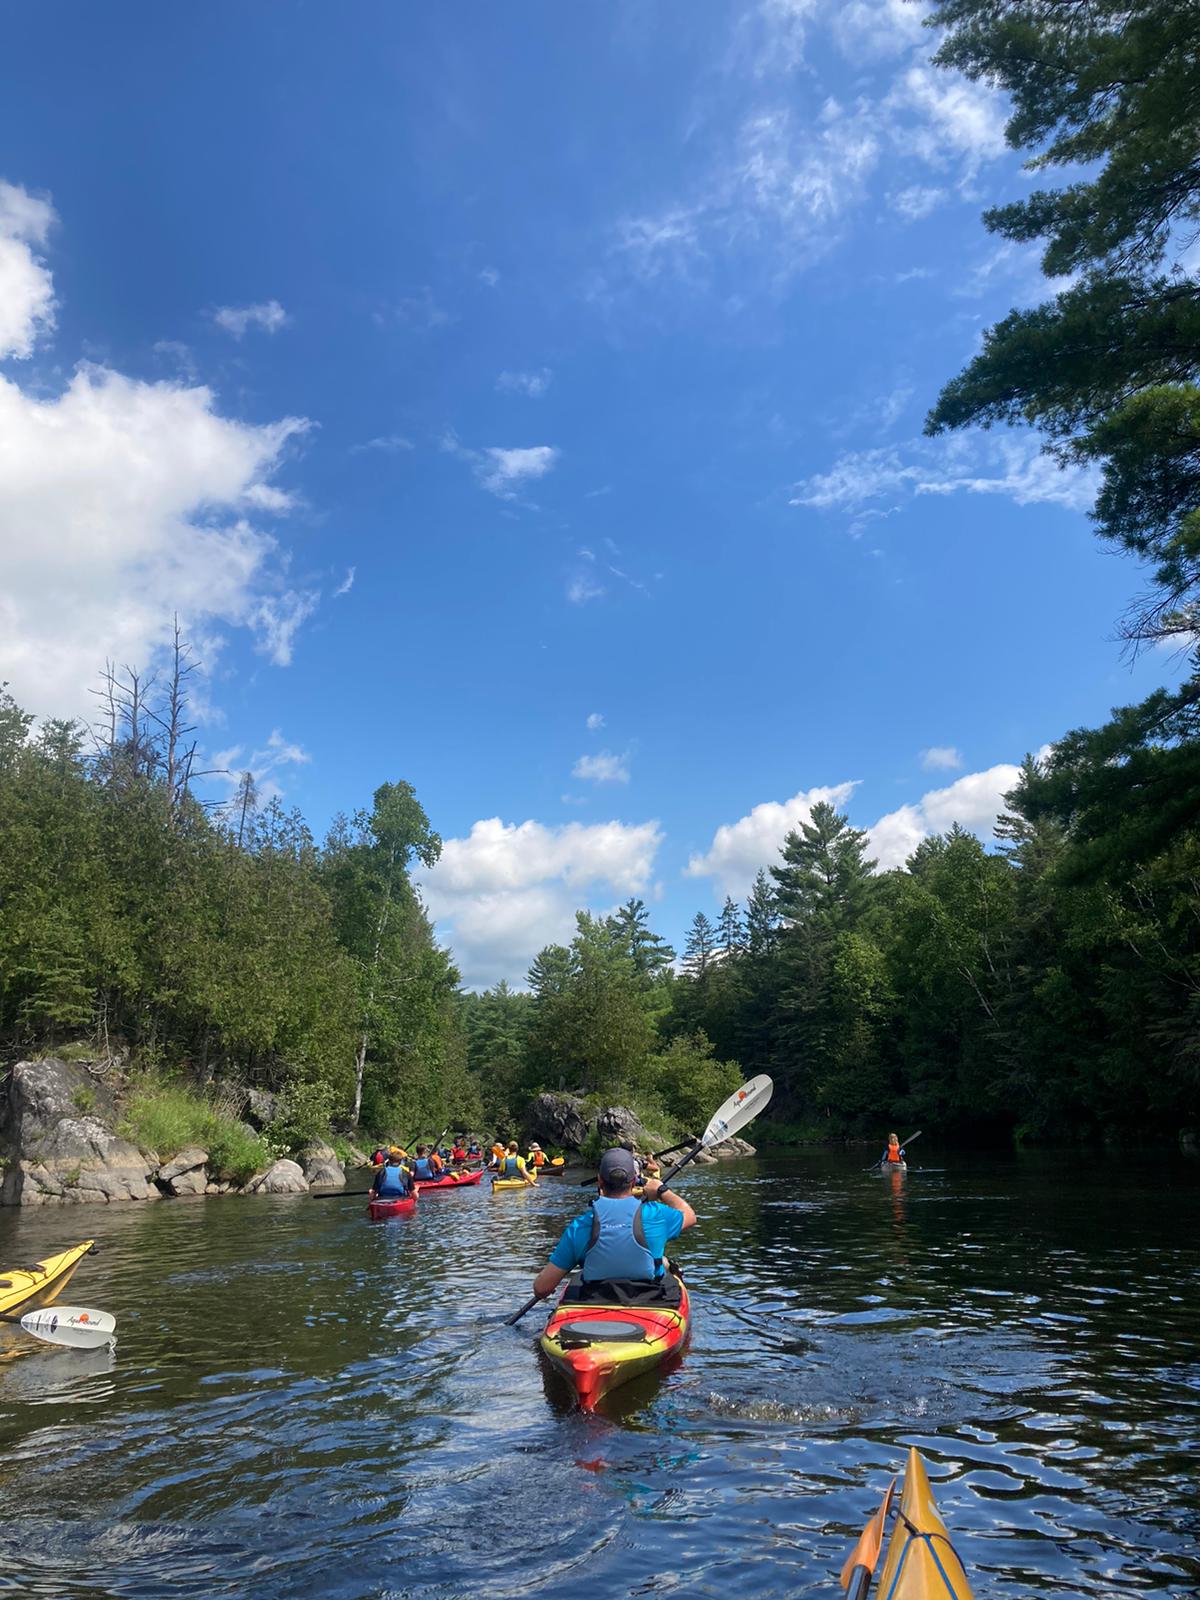 OUOTC KAYAKING TRIP – CANADA, AUGUST 2022